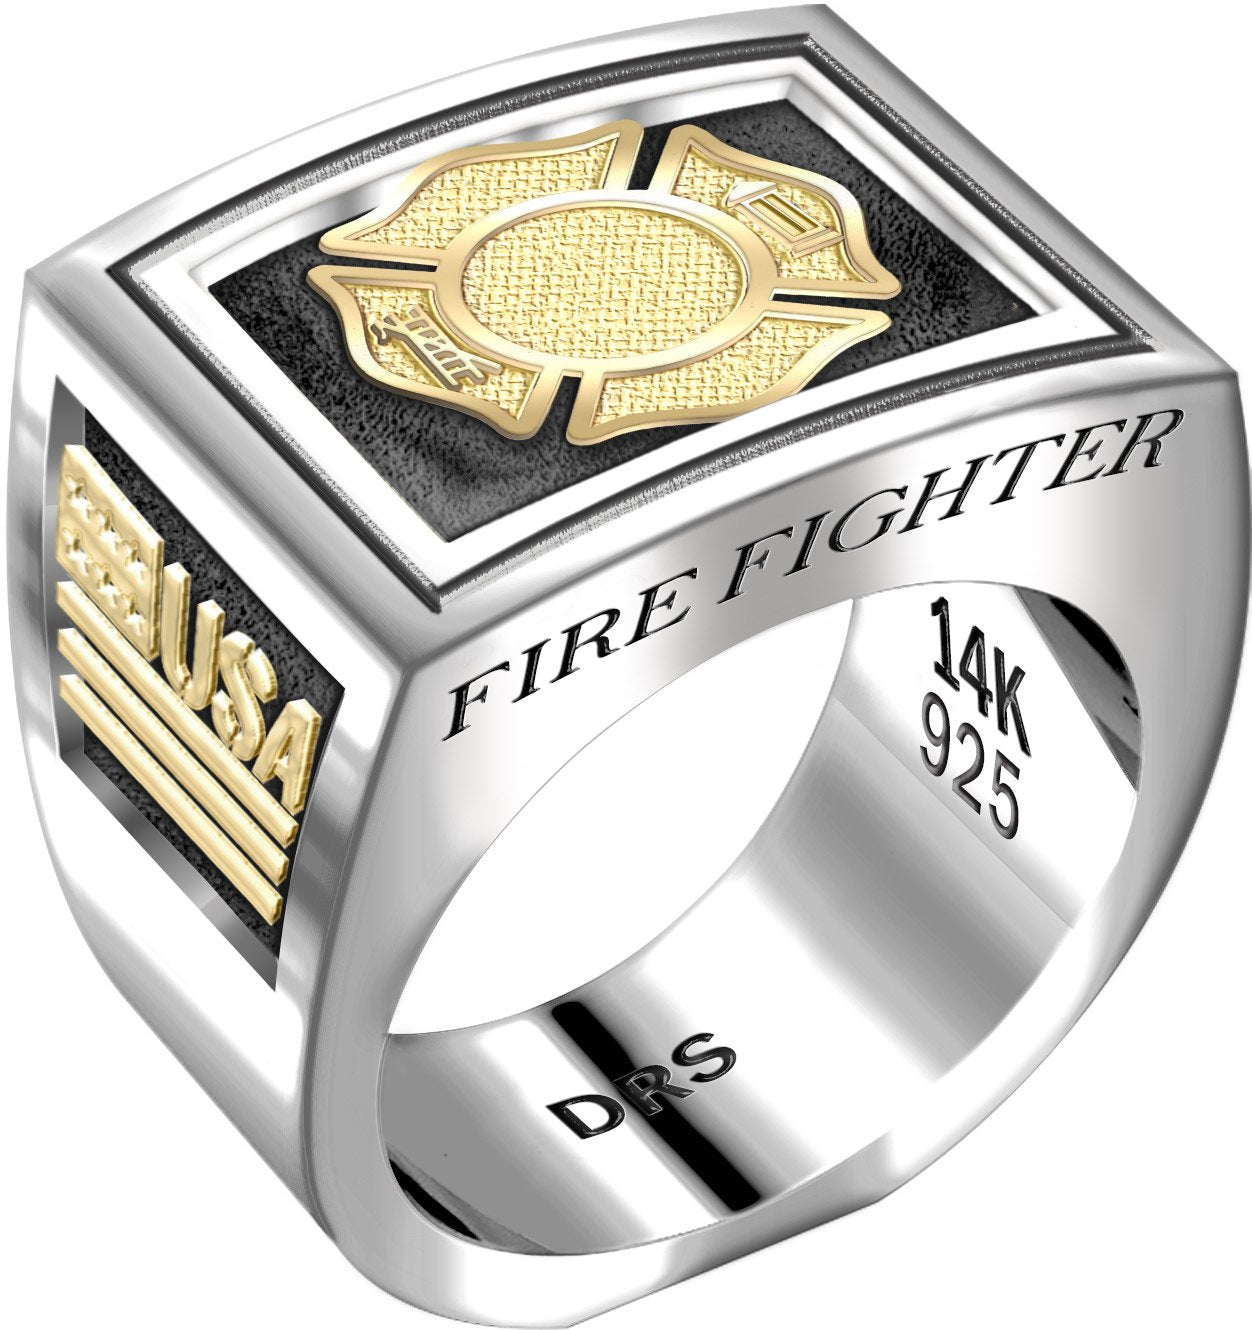 Men's Heavy Sterling Silver and 14k Yellow Gold Ring